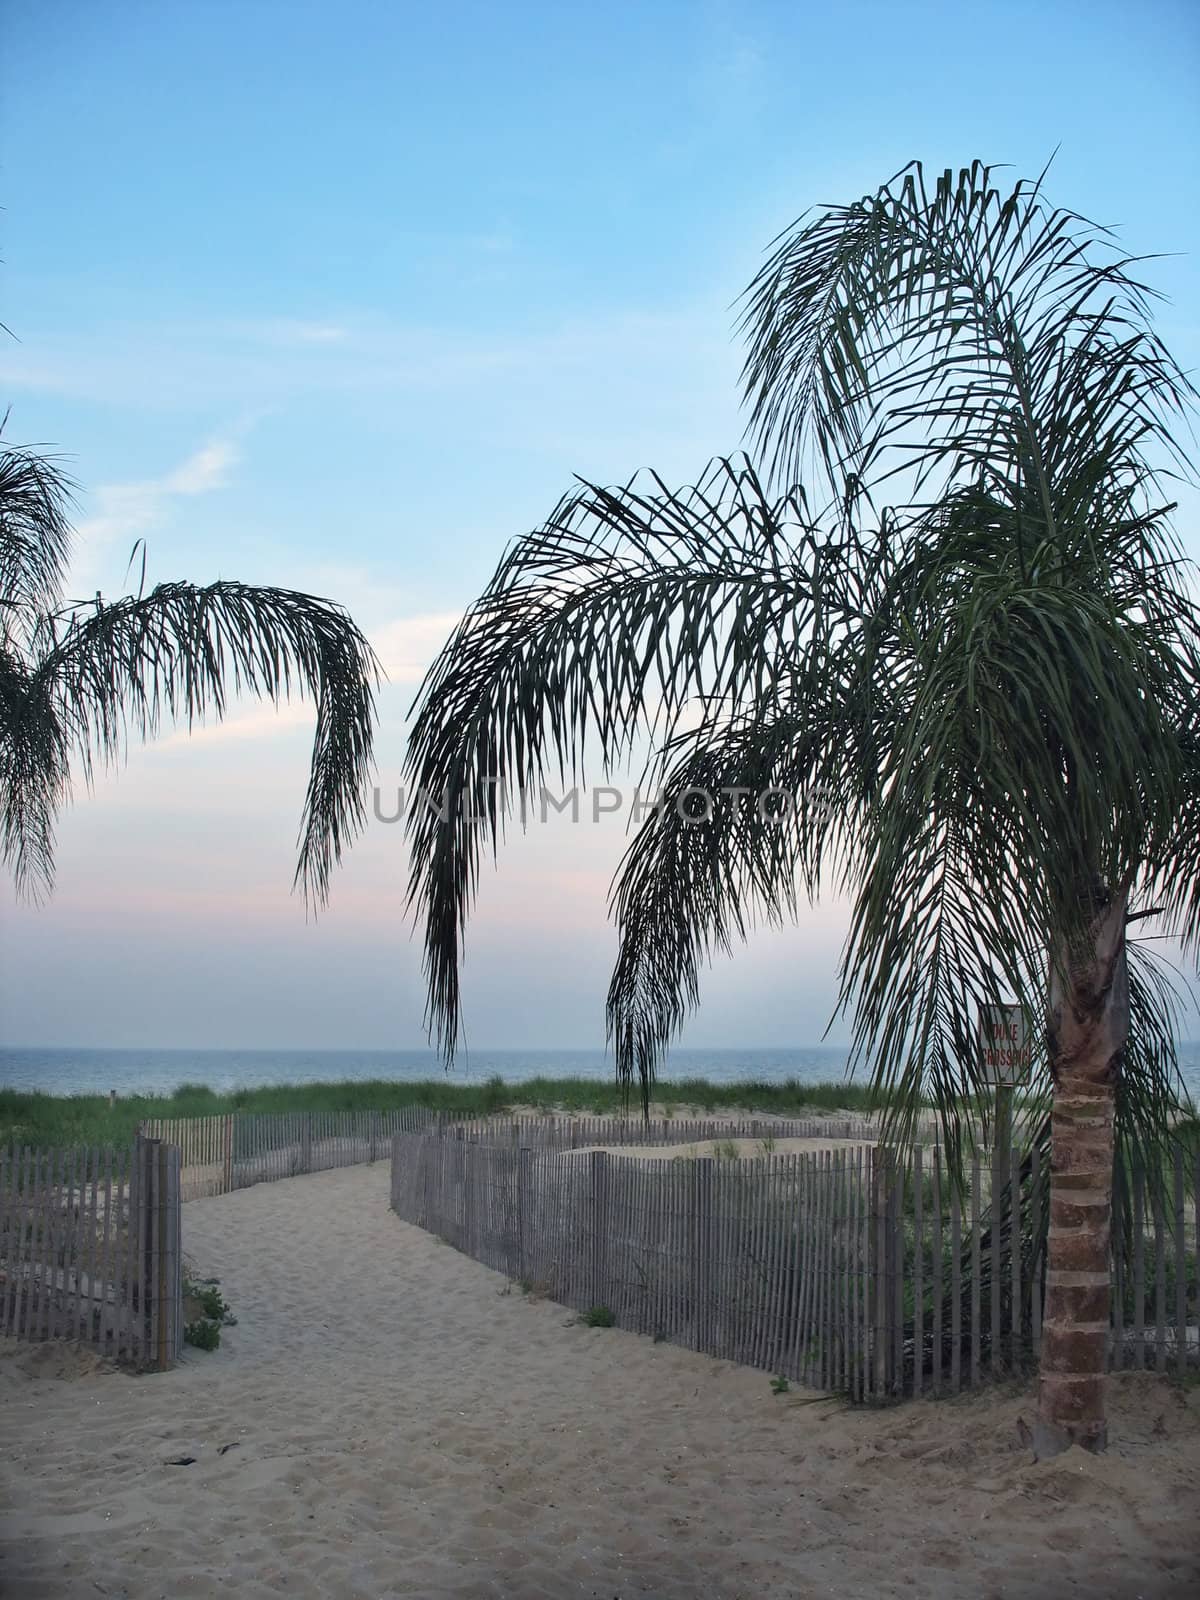 A few palm trees on the beach in Ocean City, Maryland.